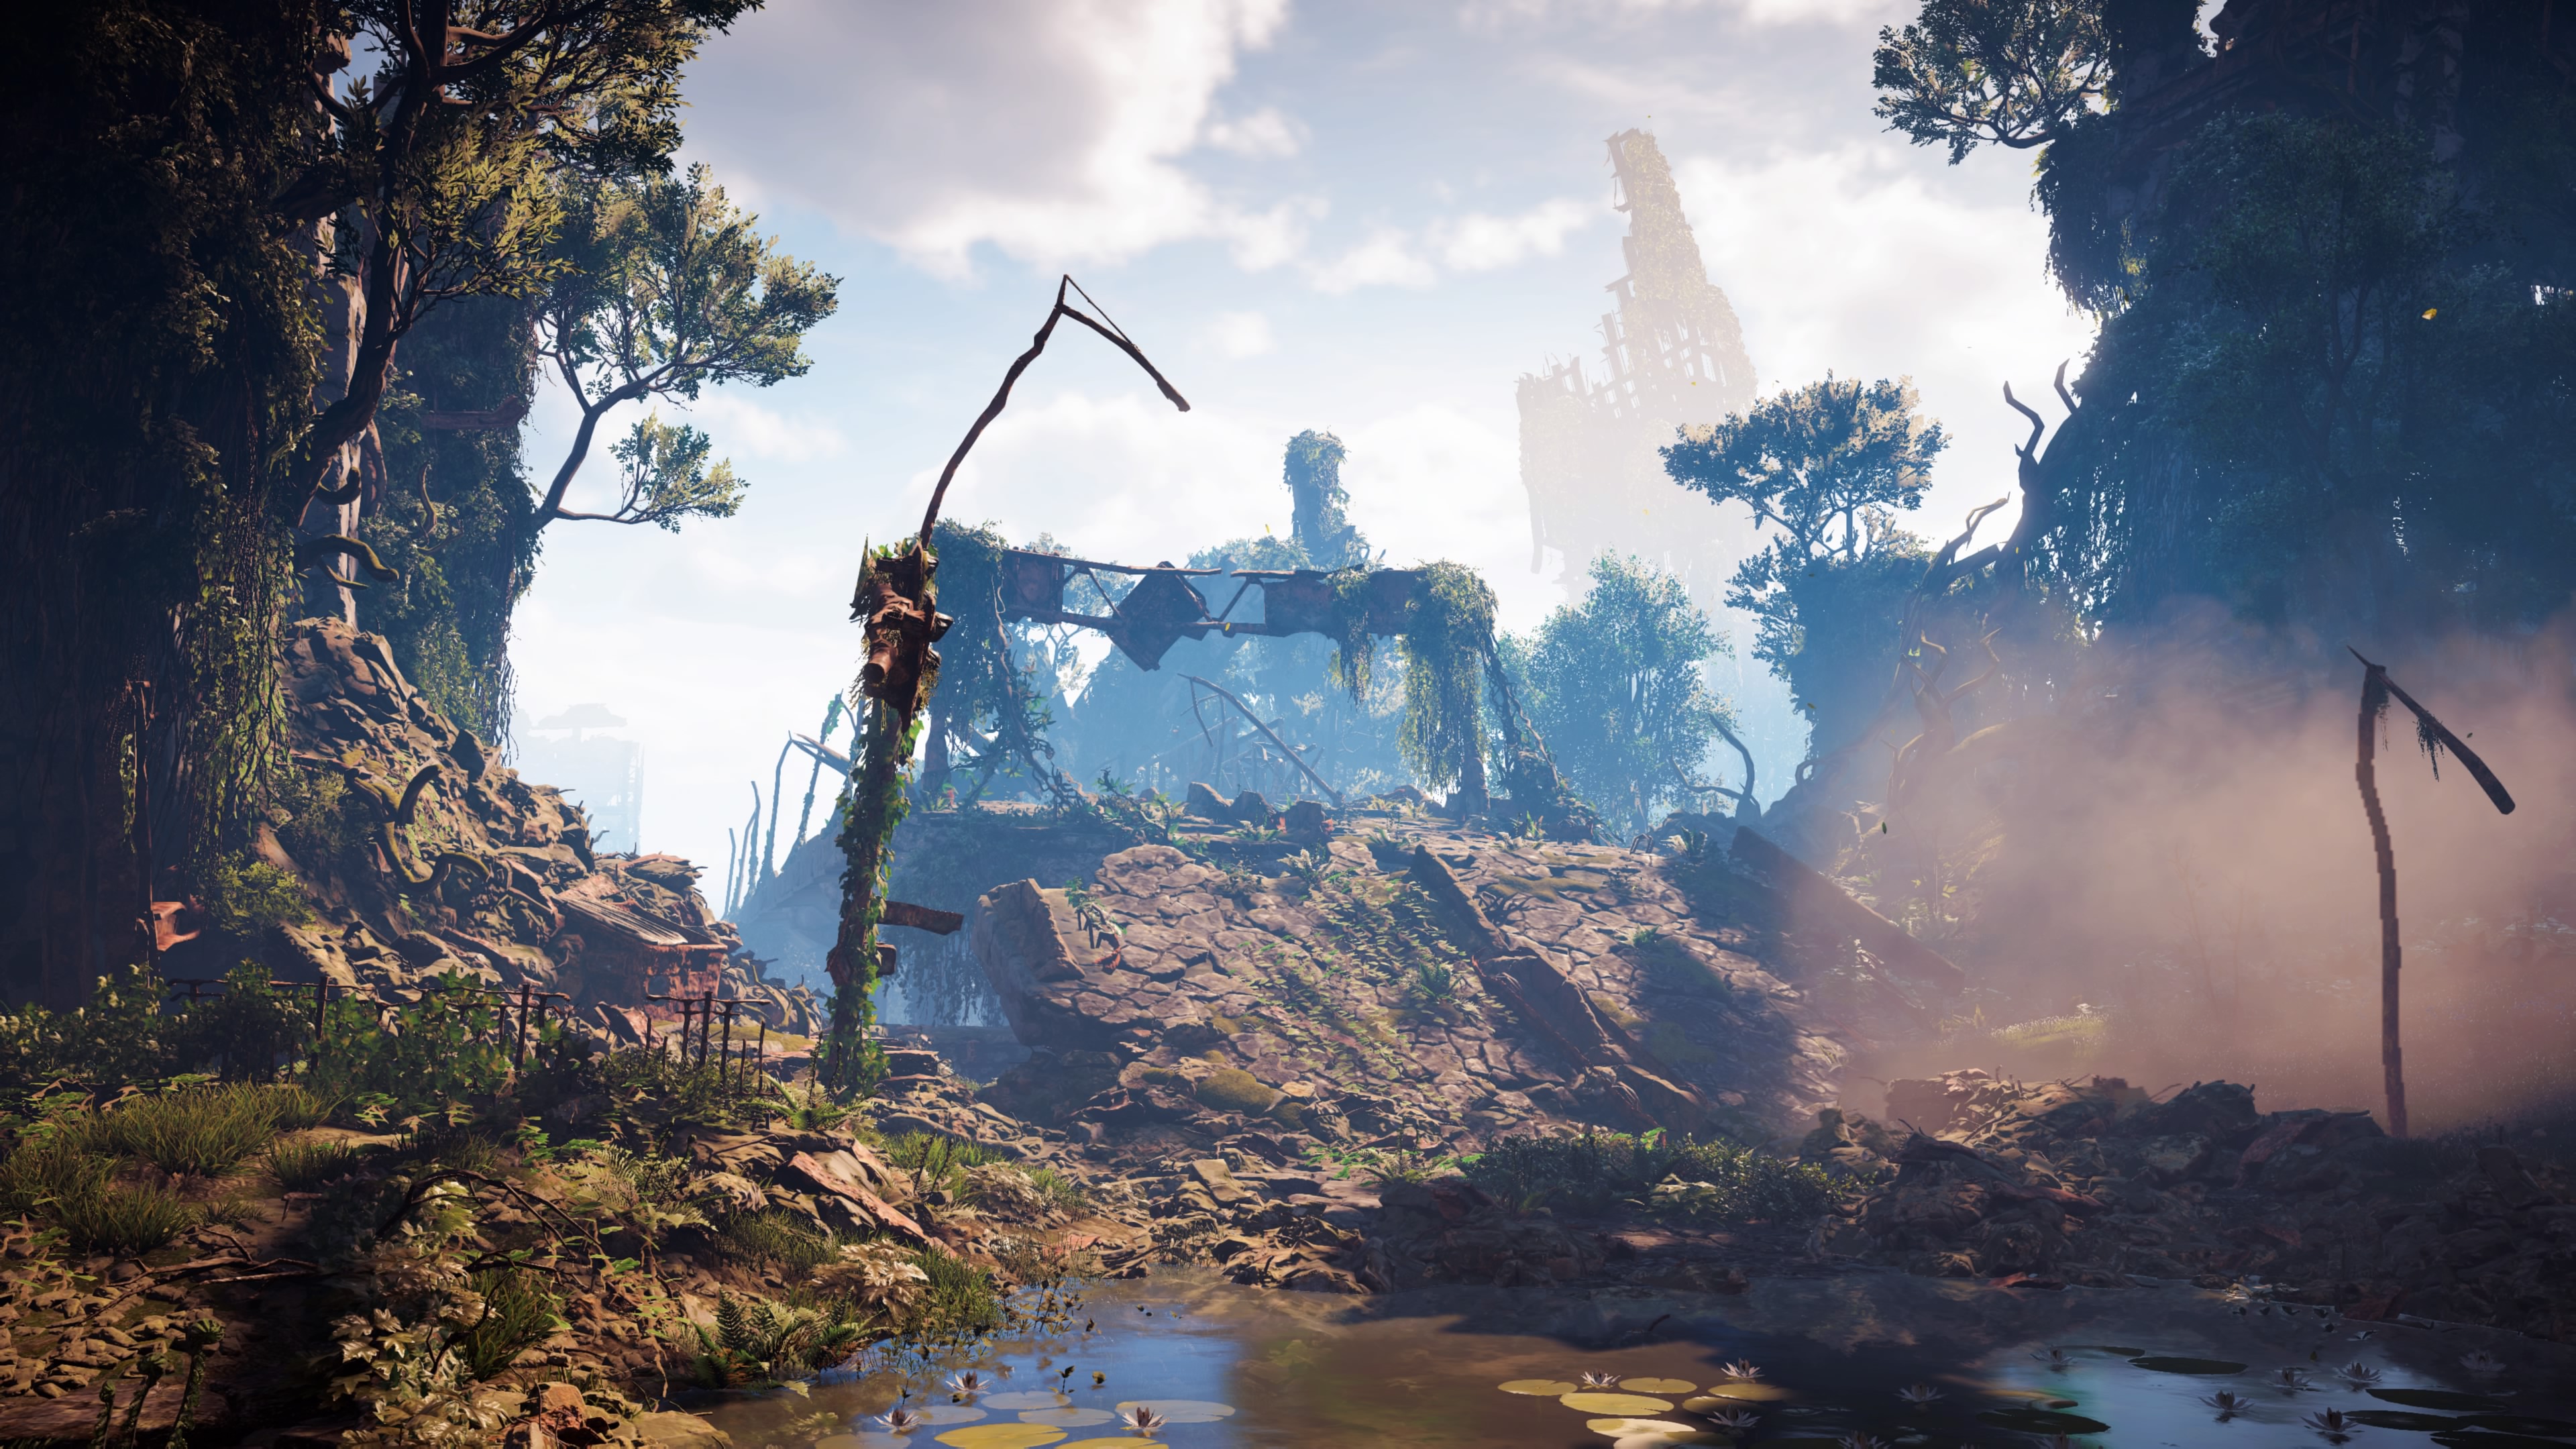 General 3840x2160 Horizon: Zero Dawn nature apocalyptic ruins overgrown video game art PlayStation 4 Playstation 4 Pro video games screen shot guerrilla games video game landscape